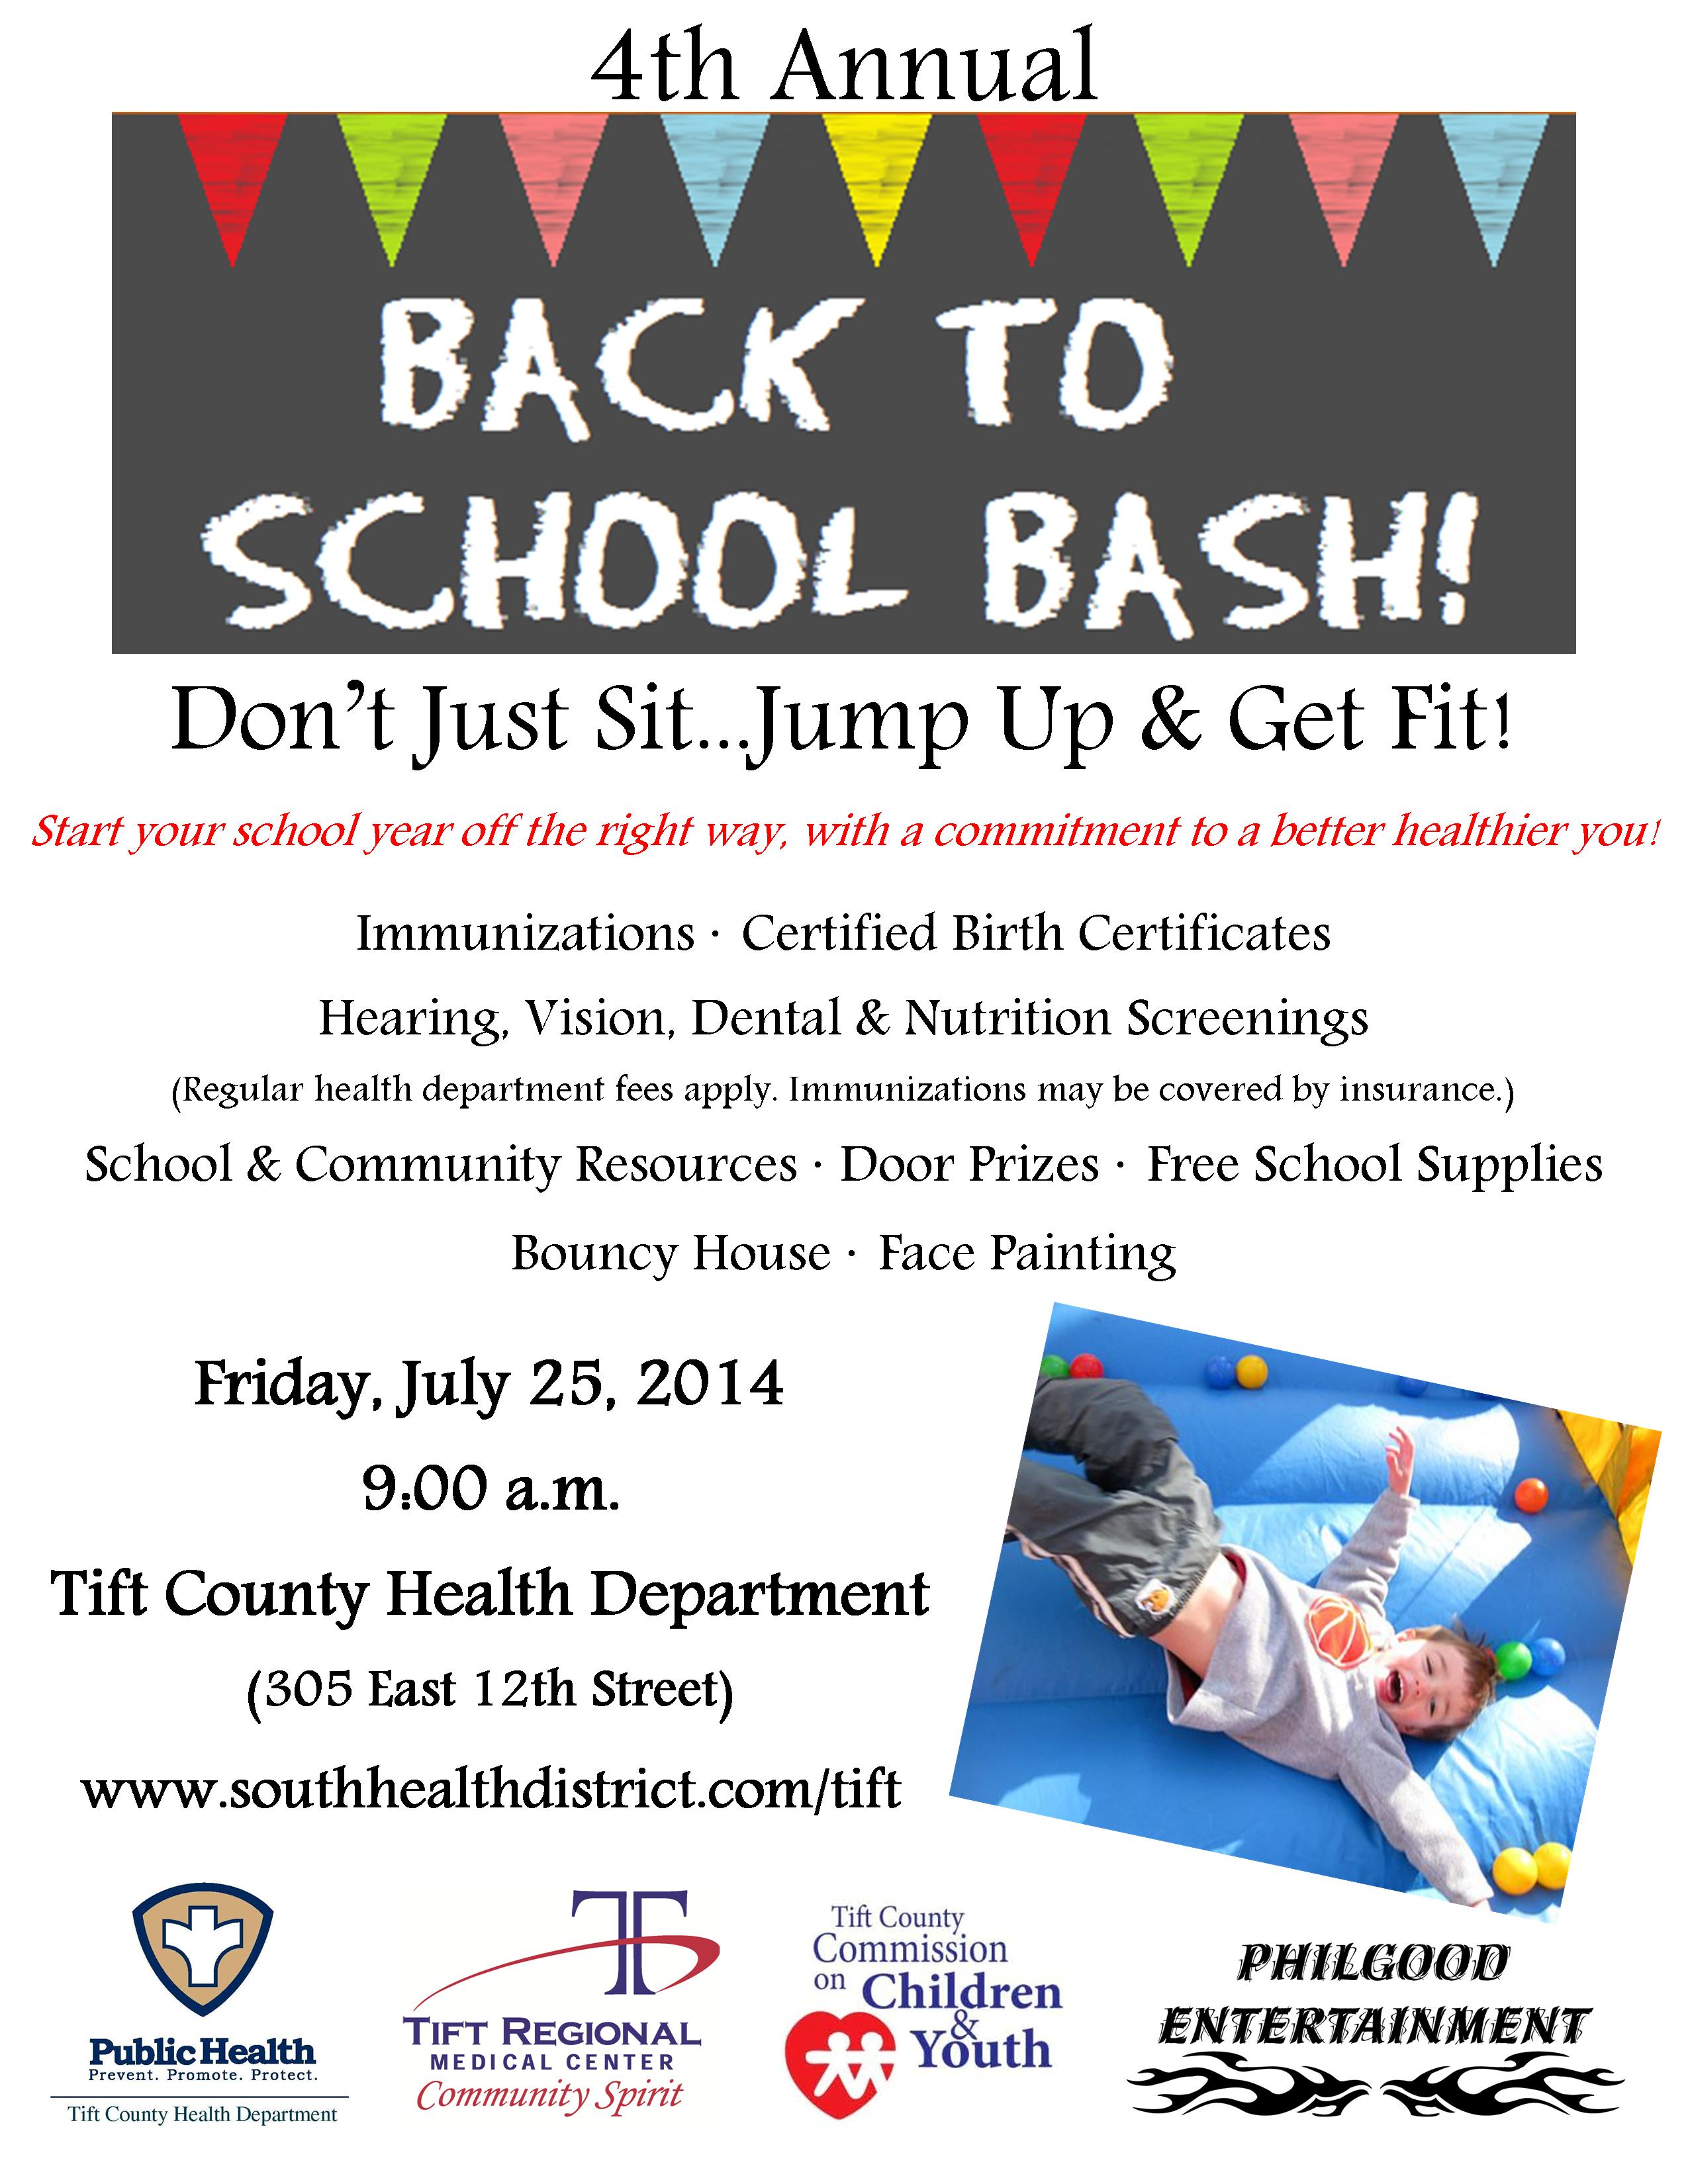 Tift County 4th Annual Back to School Bash